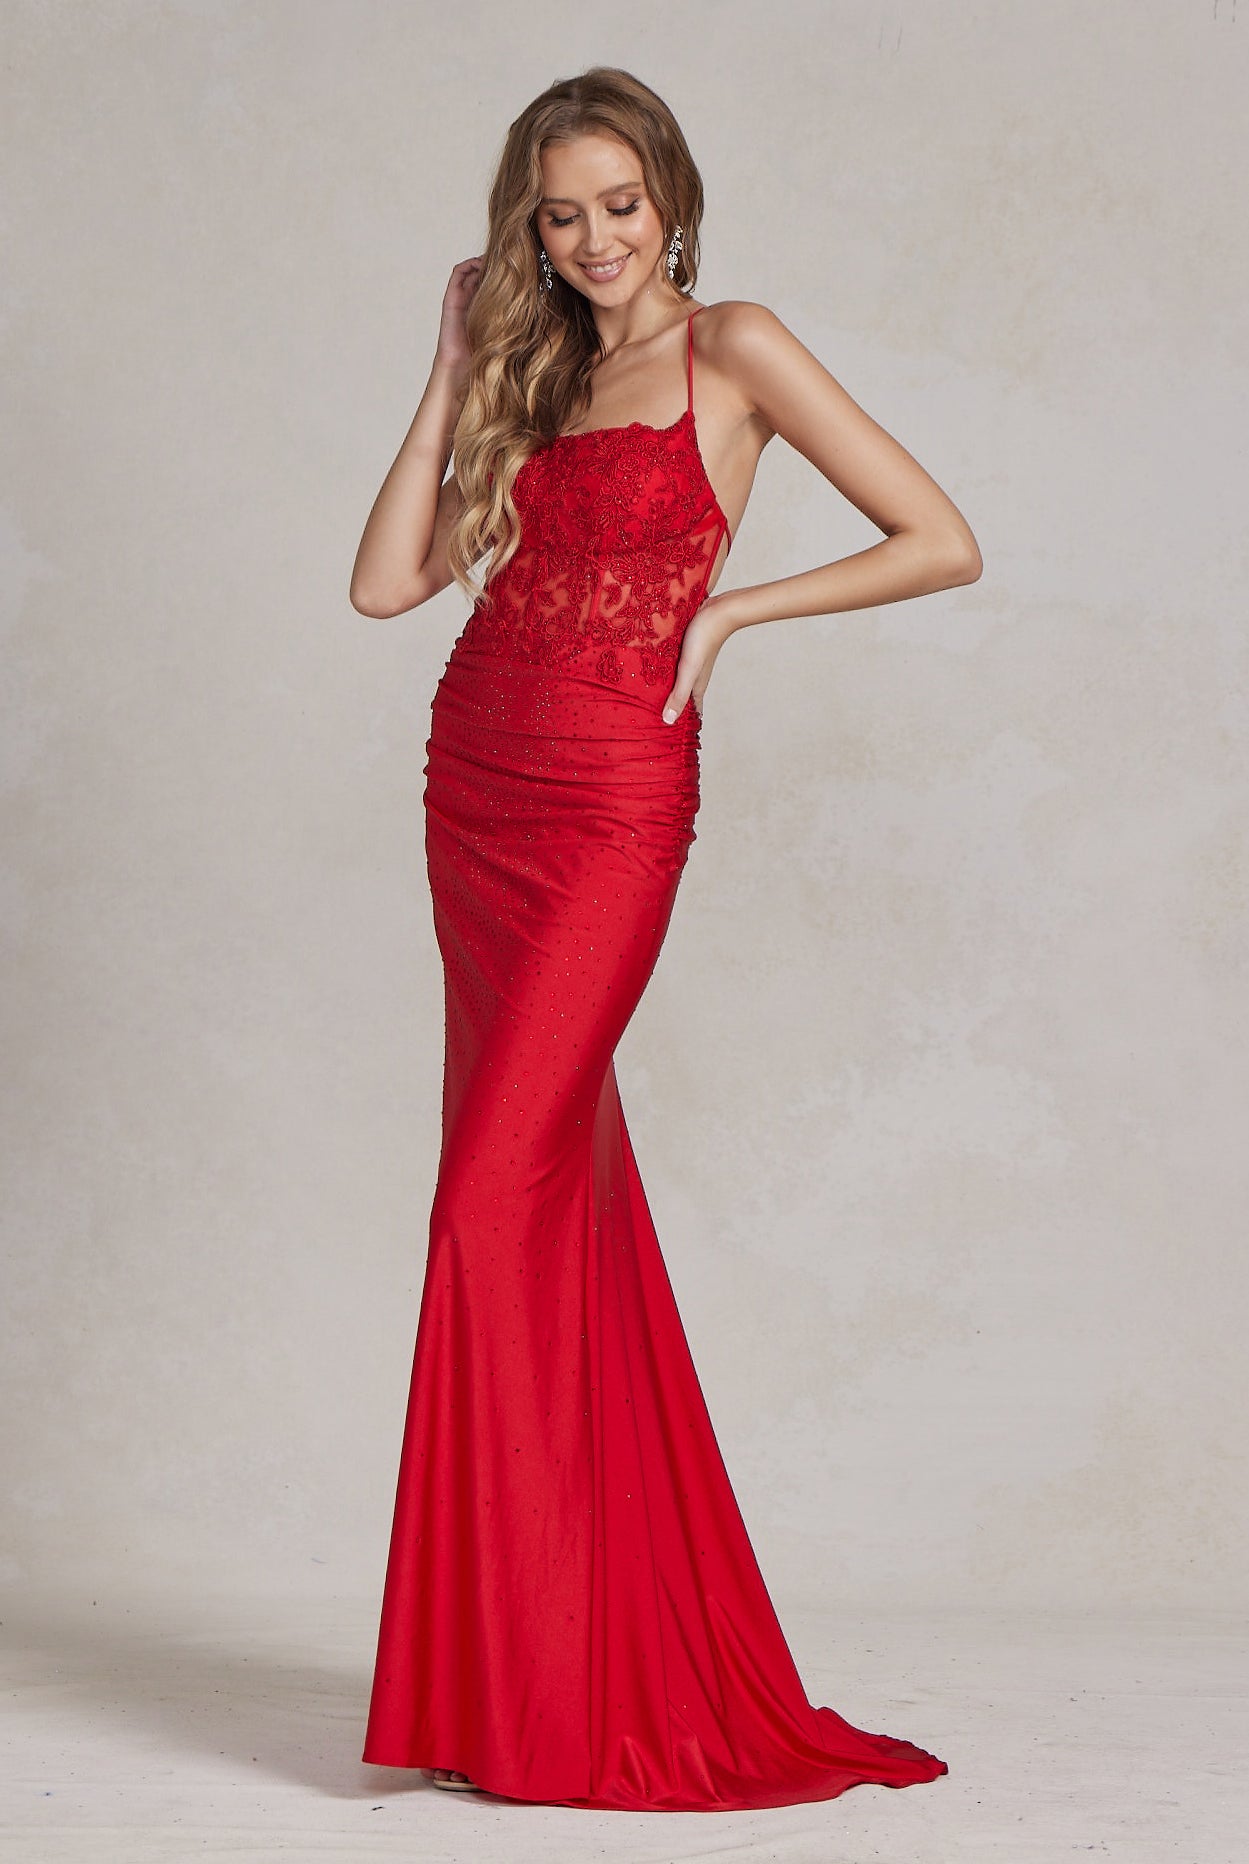 Mermaid Satin Embroidered Lace Square Neck Long Prom Dress NXE1186-Evening Dress-smcfashion.com